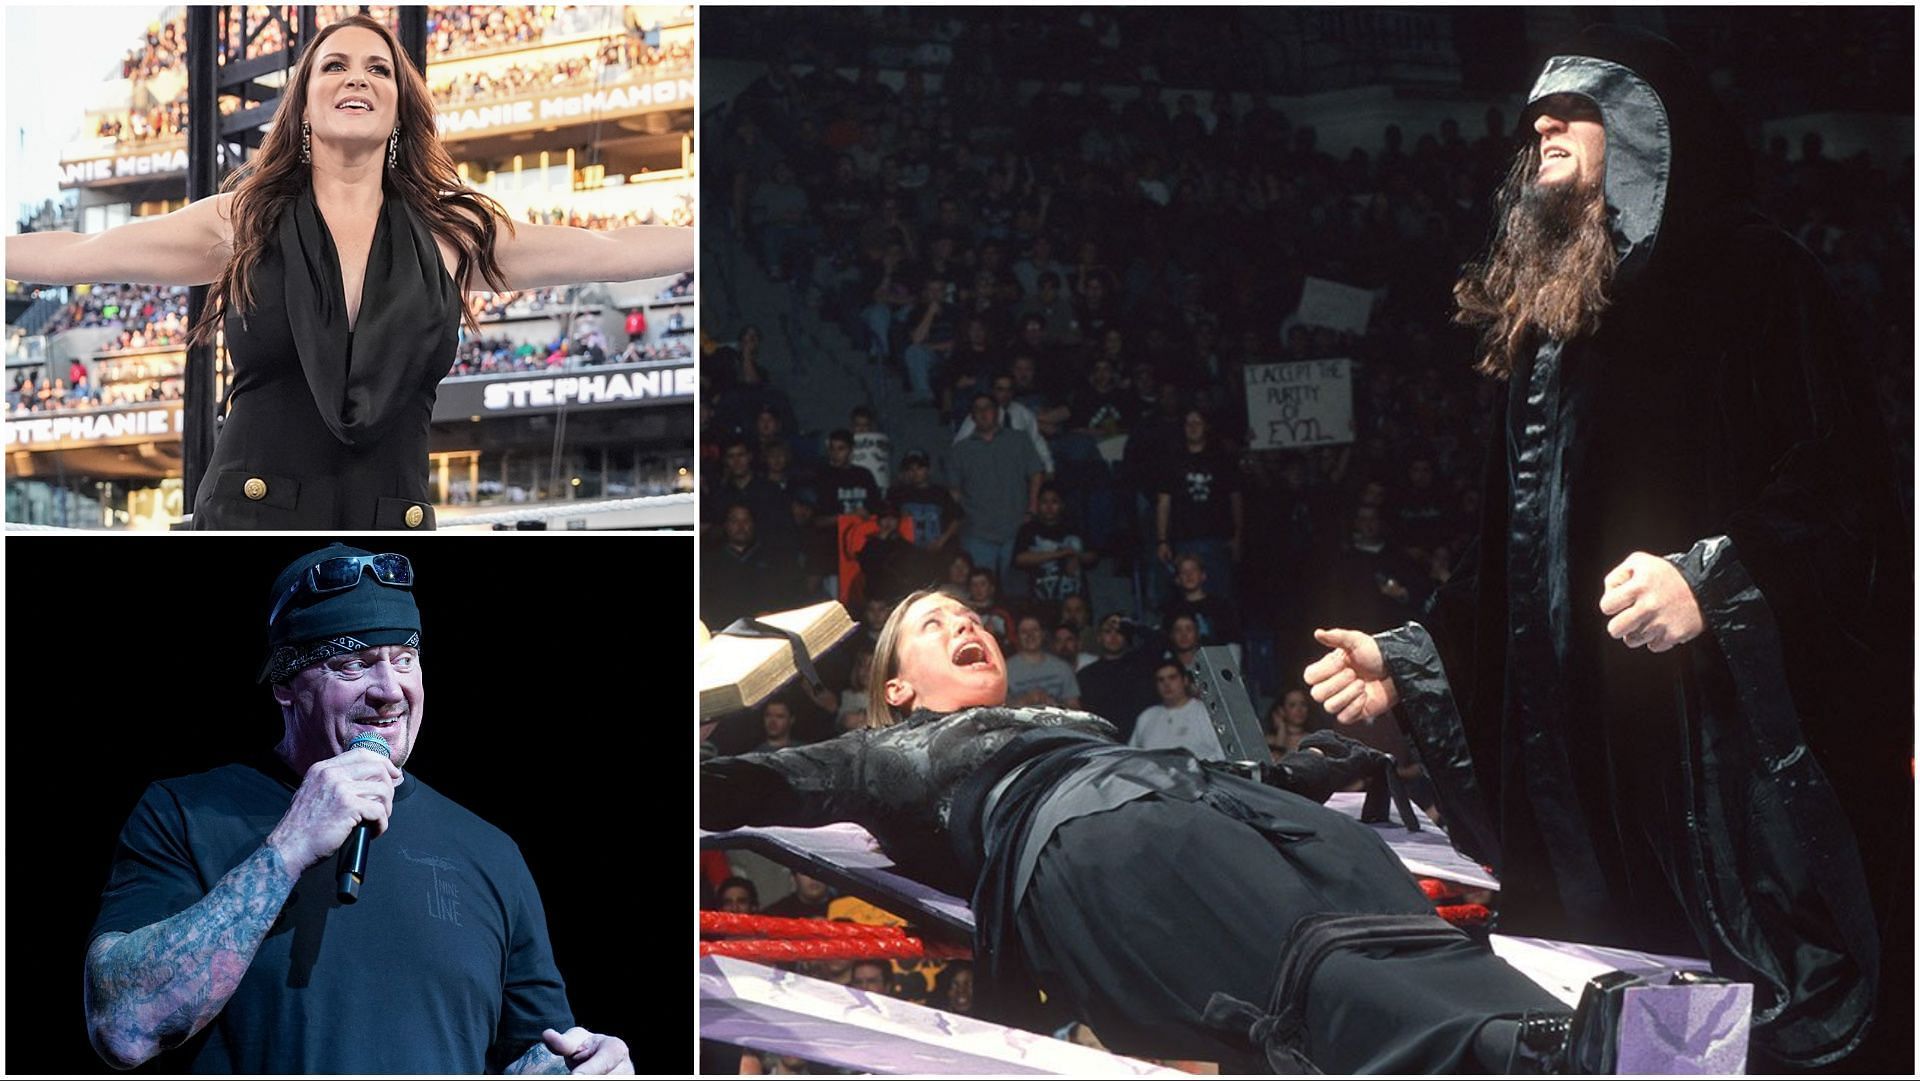 Stephanie McMahon at WrestleMania XL, The Undertaker at his one-man show, Taker and Stephanie on WWE RAW